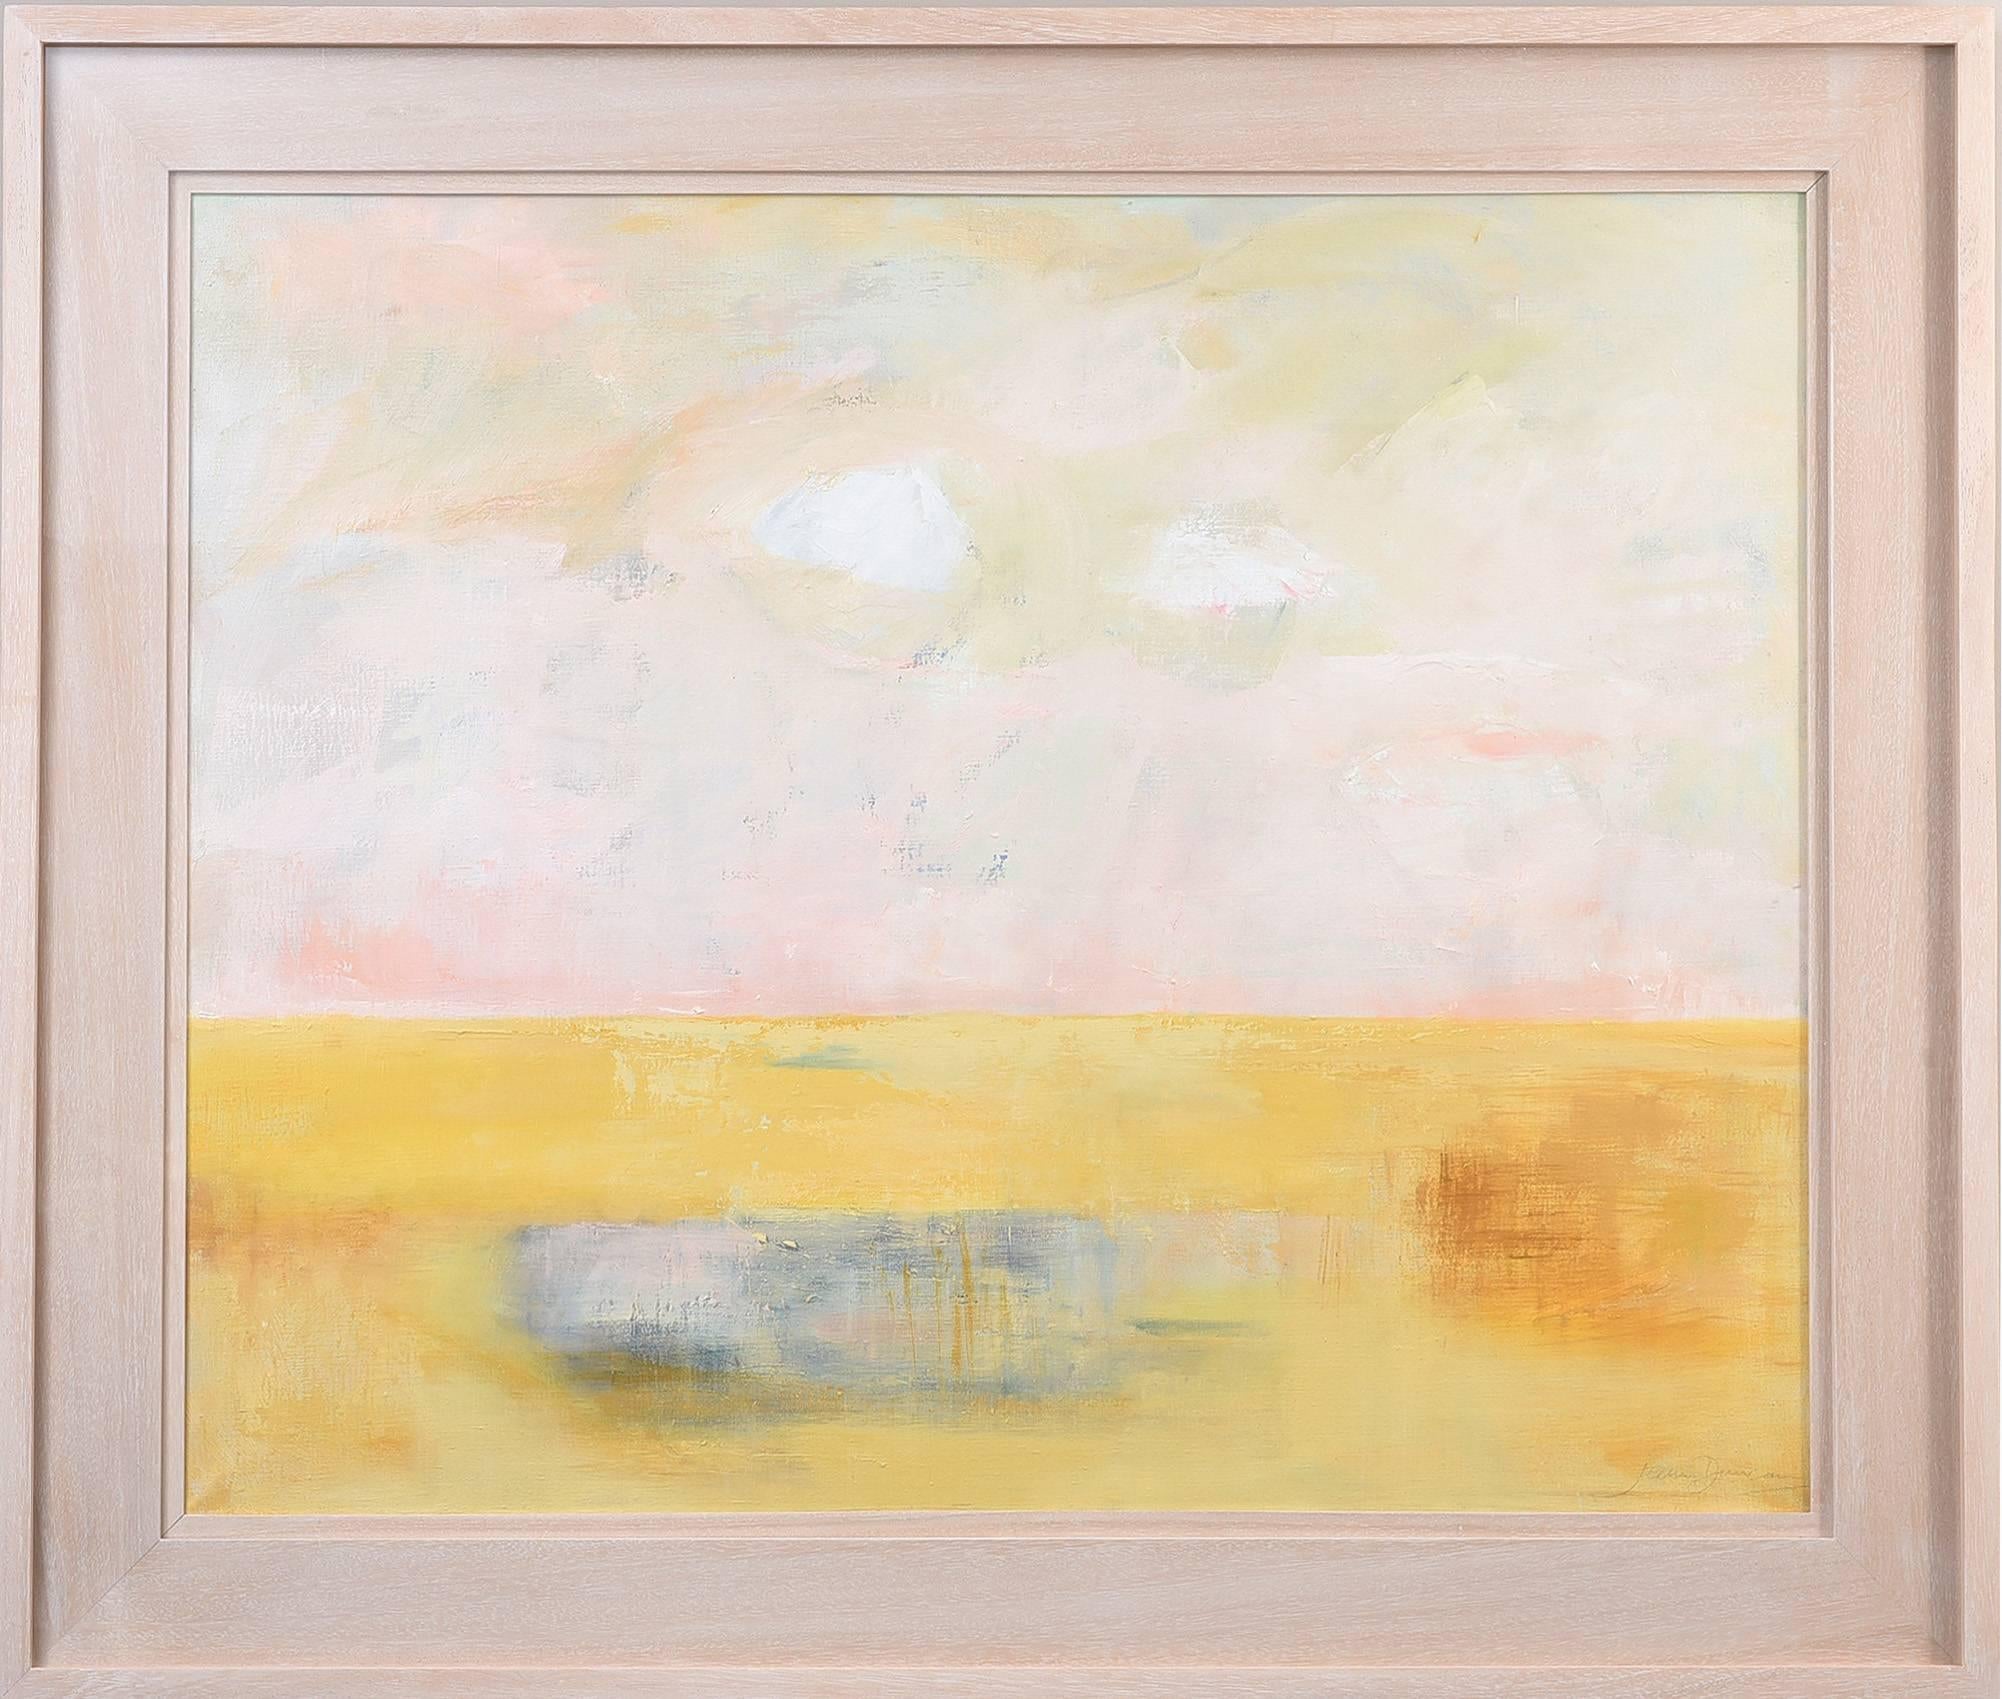 Oil on canvas
Signed
Framed
Measures: 28 x 35 inches (36 x 44 inches framed)

Jean Duncan was educated at the Edinburgh College of Art and the Ulster Polytechnic Art and Design Centre. In 1994, Jean was elected to the Royal Ulster Academy and